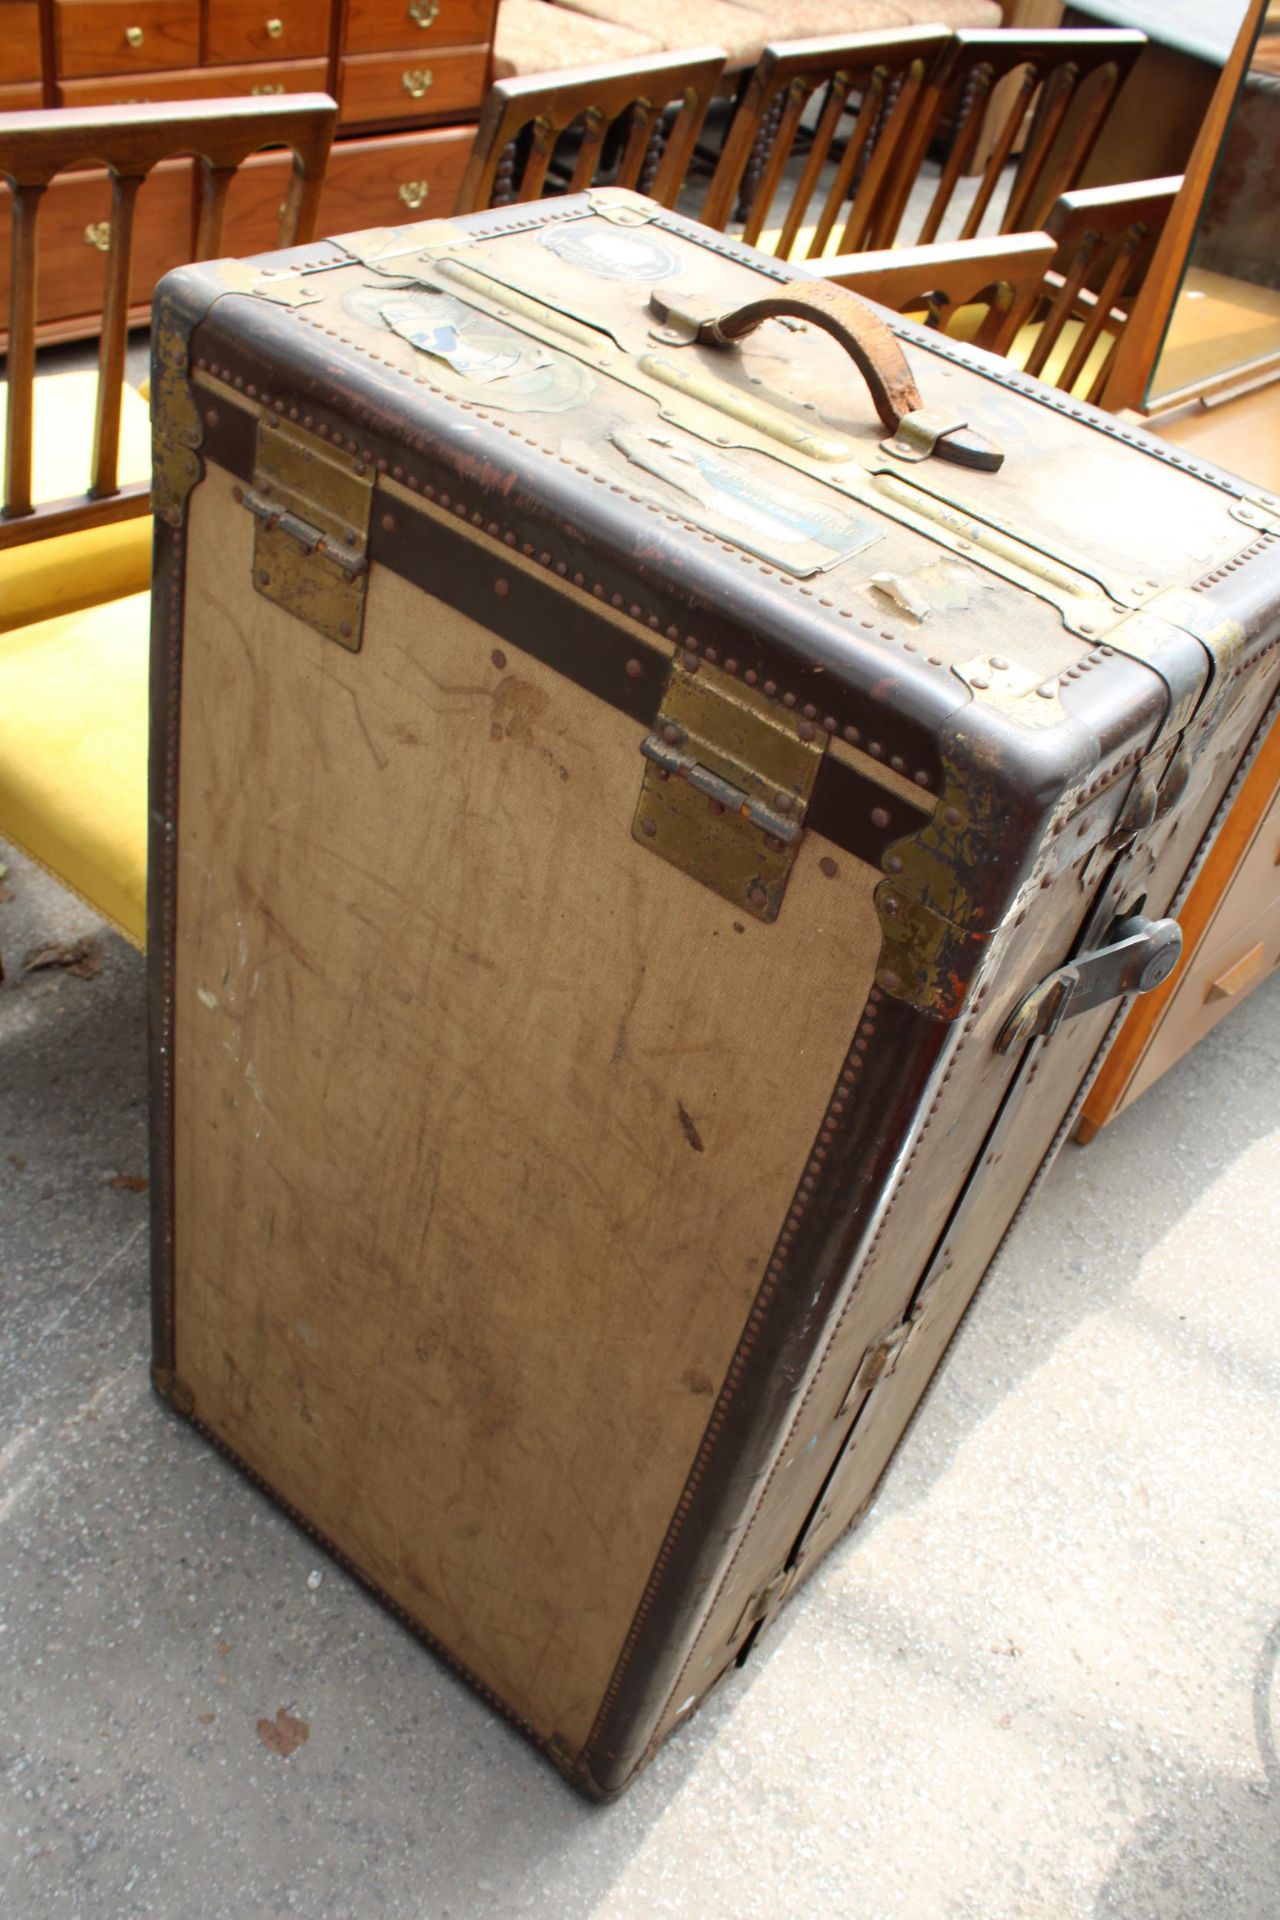 AN EARLY 20TH CENTURY ANTLER LUGGAGE TRAVEL WARDROBE STEAMER TRUNK BEARING VARIOUS TRAVEL LABELS - Image 14 of 16